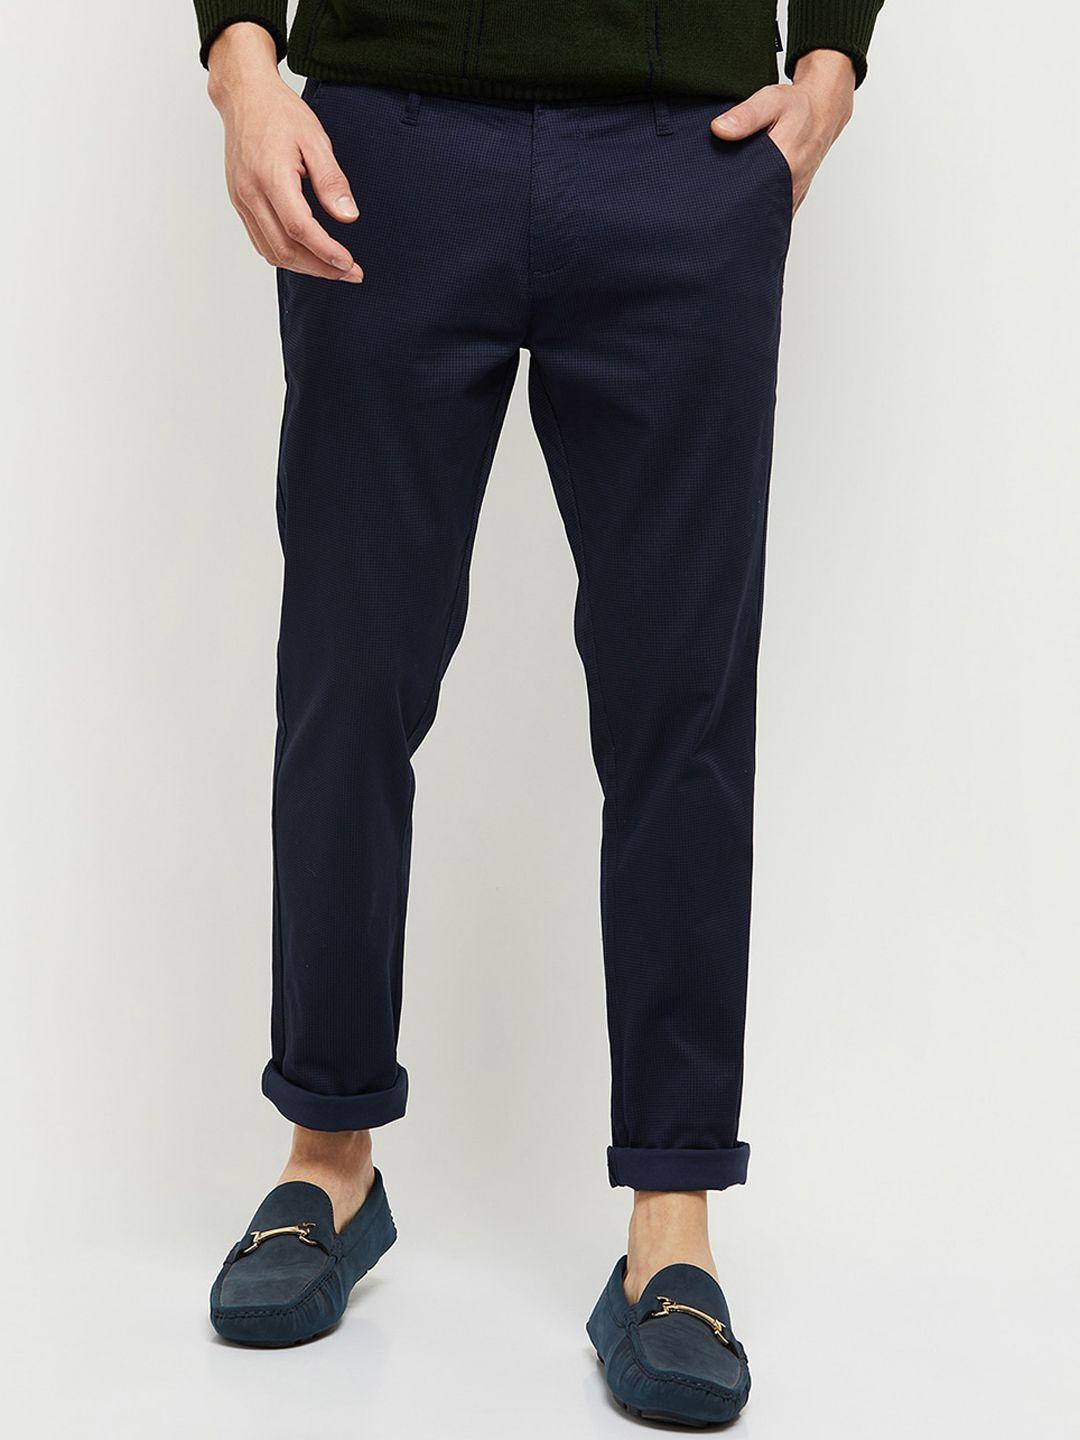 max men blue chinos trousers